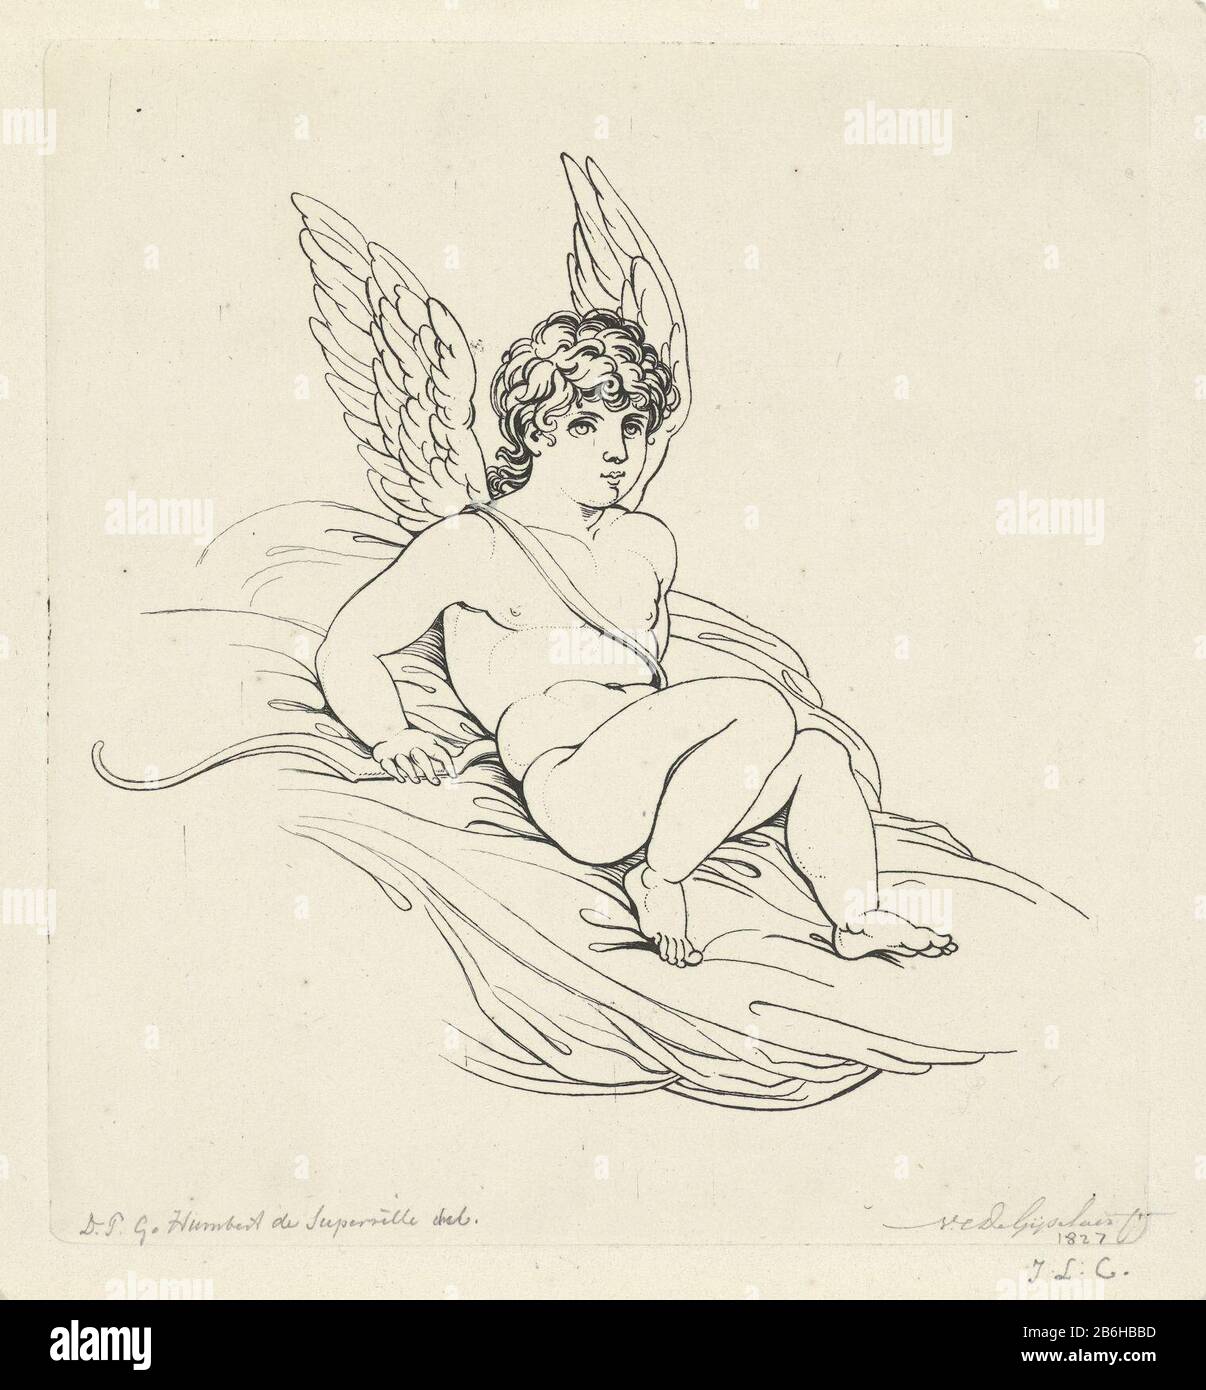 Cupid, the RP-P-OB-55670 Cupid is on the ground, with bow in hand. Manufacturer : printmaker: Nicolaas Cornelis de Gijselaar (listed property) to drawing: David Pierre Giottino Humbert de Superville (listed property) Place manufacture: Leiden Date: 1827 Physical features: etching material: paper Technique: etching dimensions: plate edge b 162 mm x h 177 mm Subject: ( or story) Cupid, Amor (Eros) Stock Photo